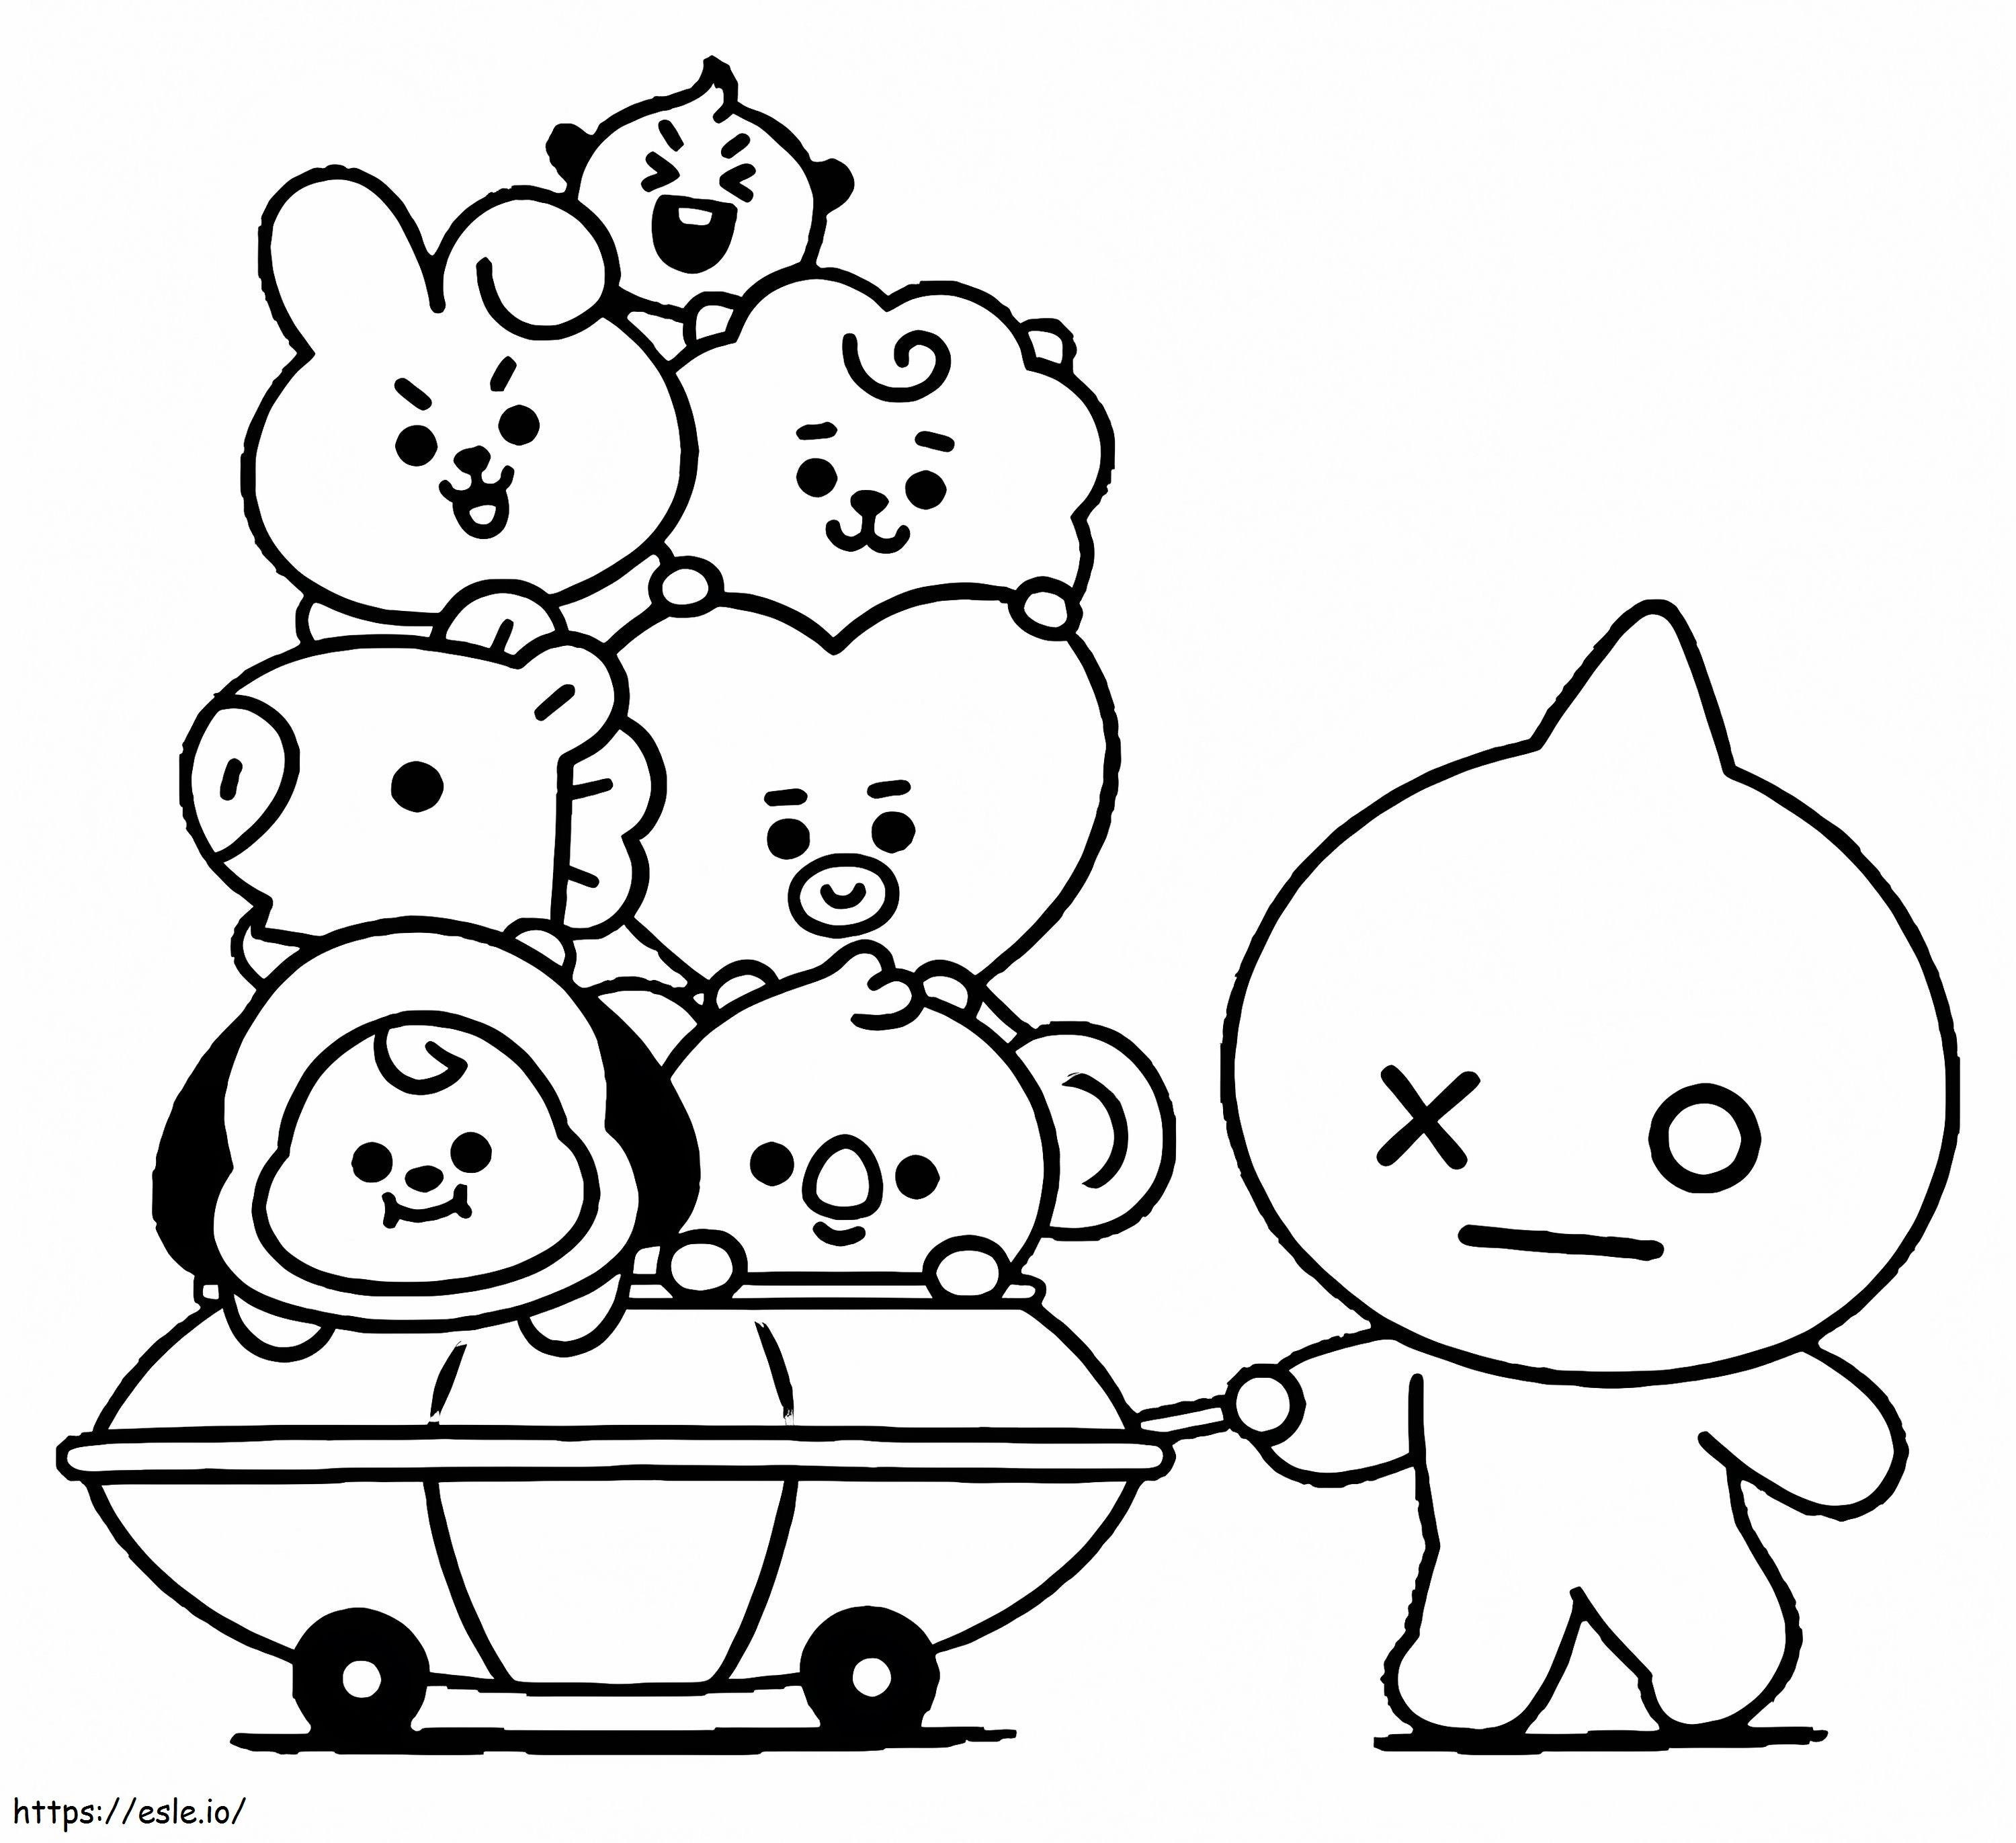 BT21 Printable coloring page